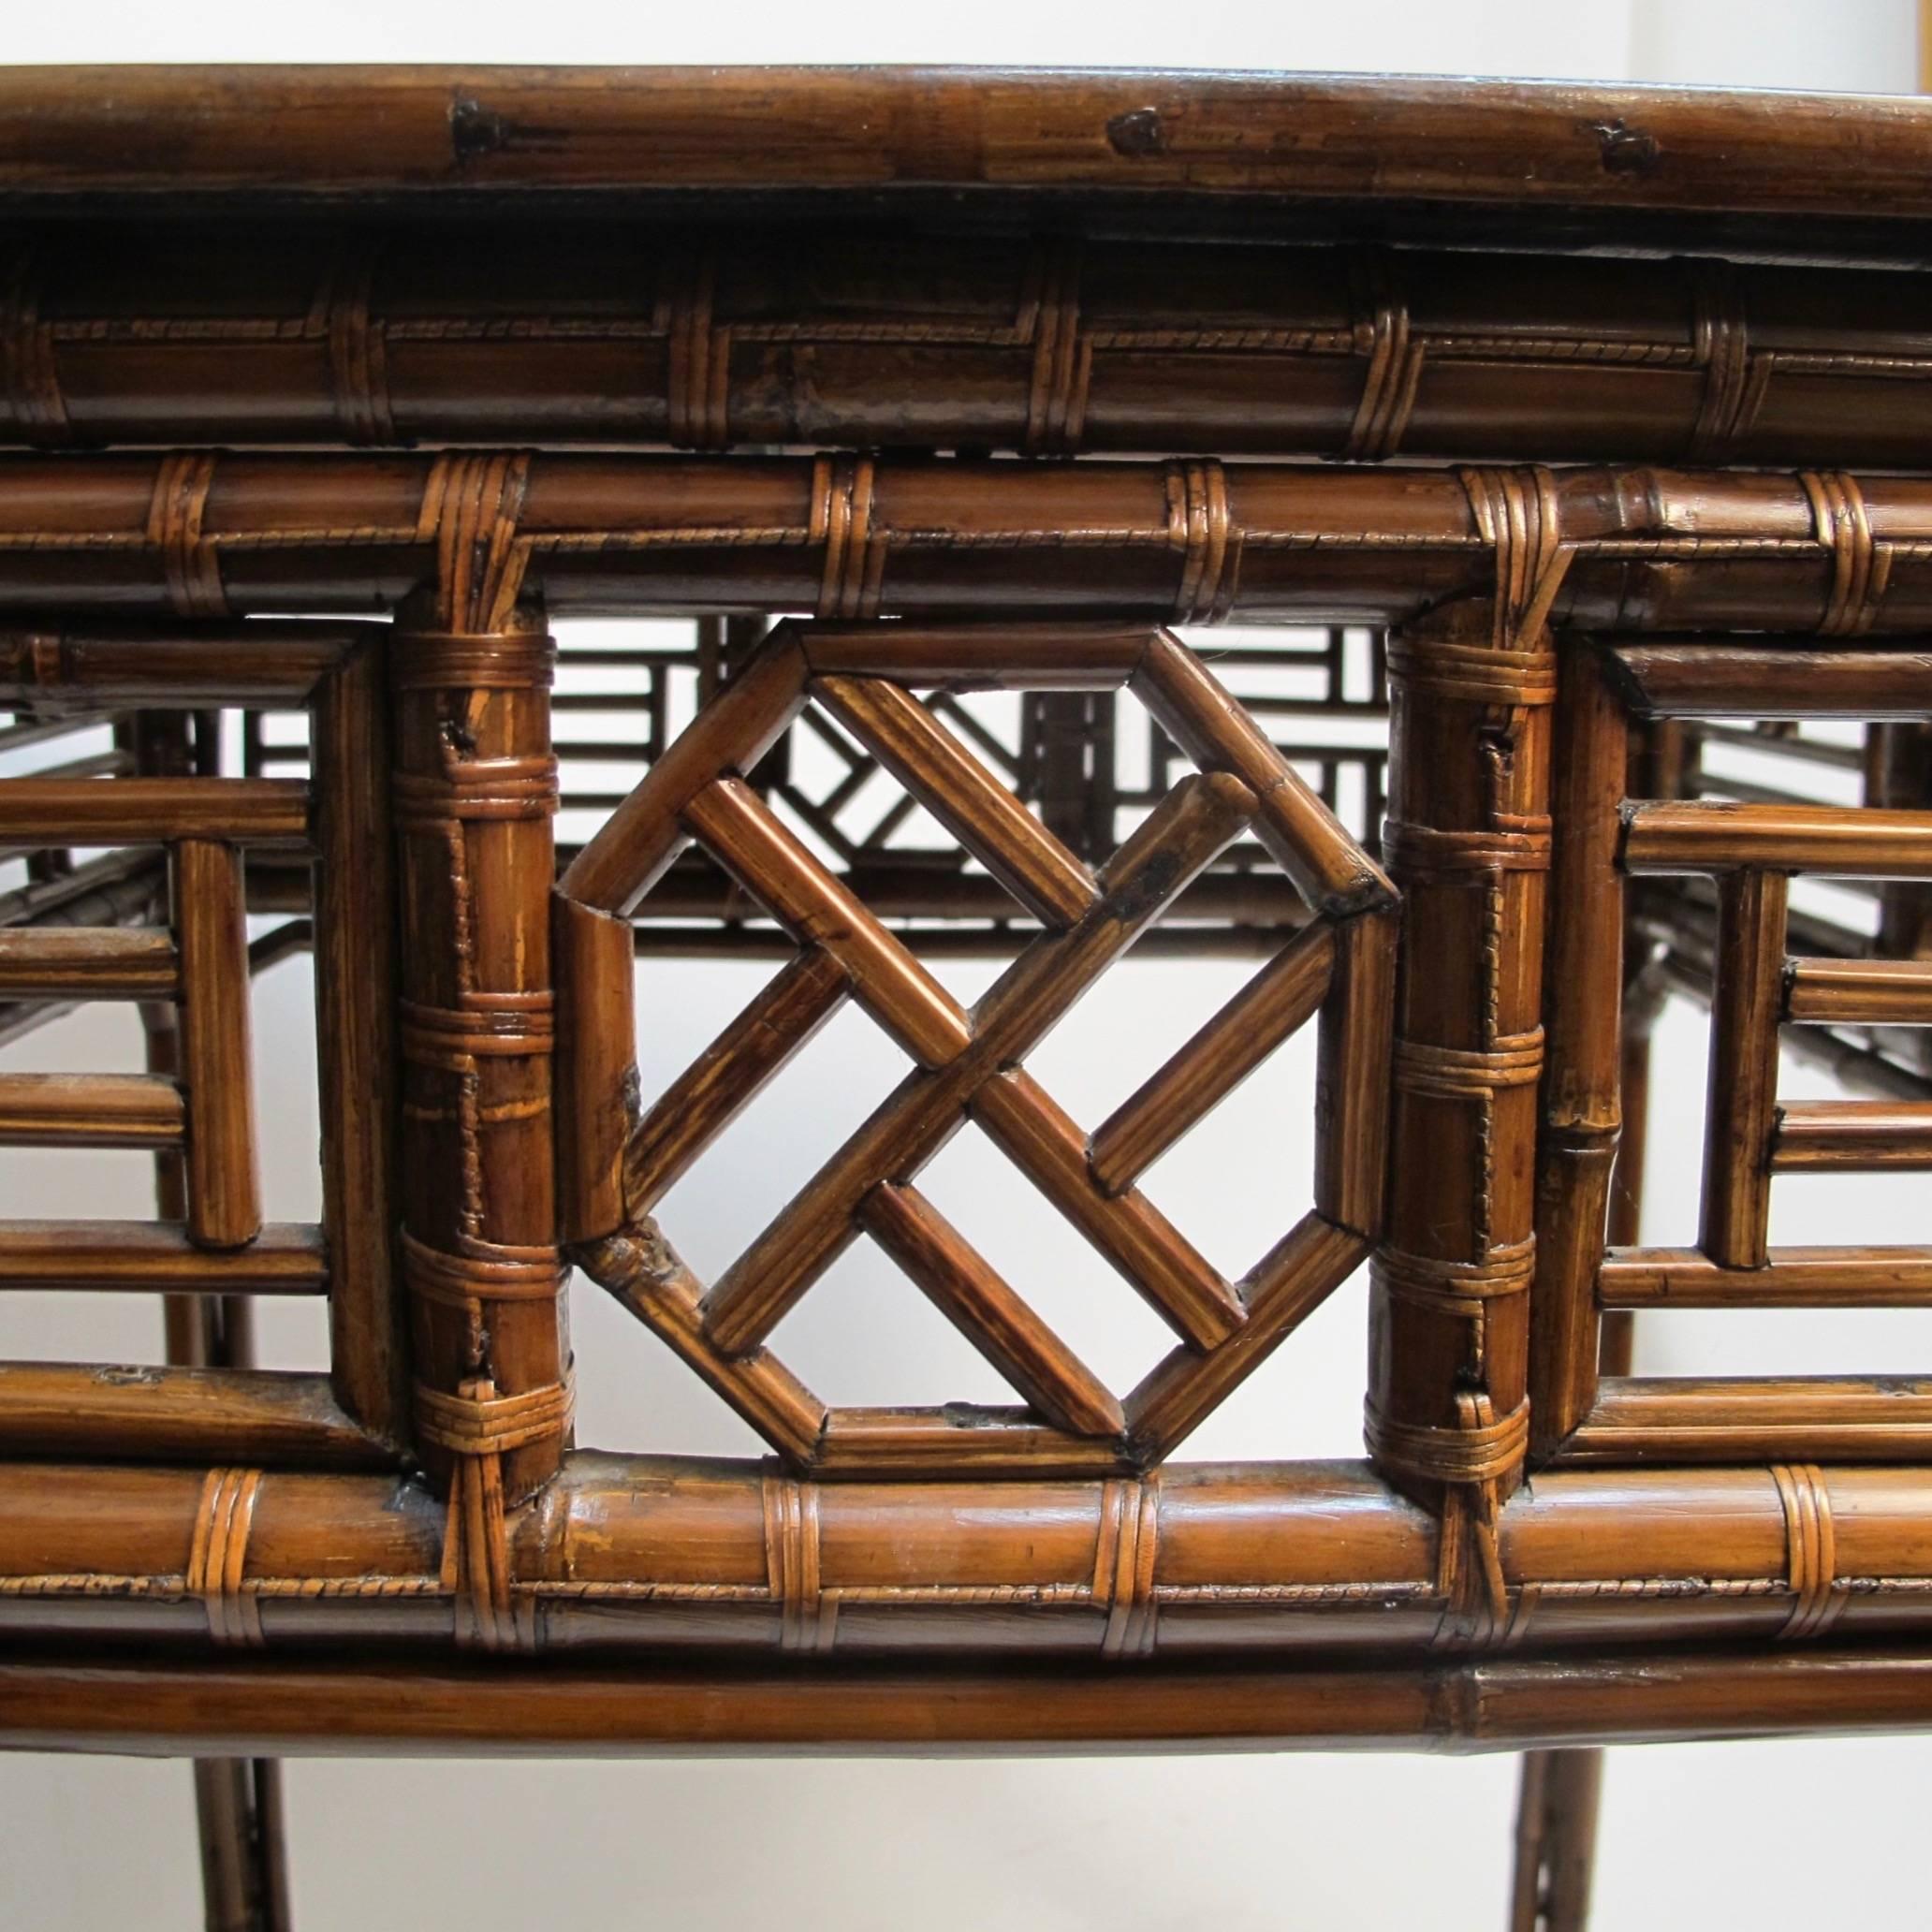 Square table with black lacquer wood top and intricate bamboo design. Completely handcrafted showing no nails or metal hardware. China, early to mid-20th century.